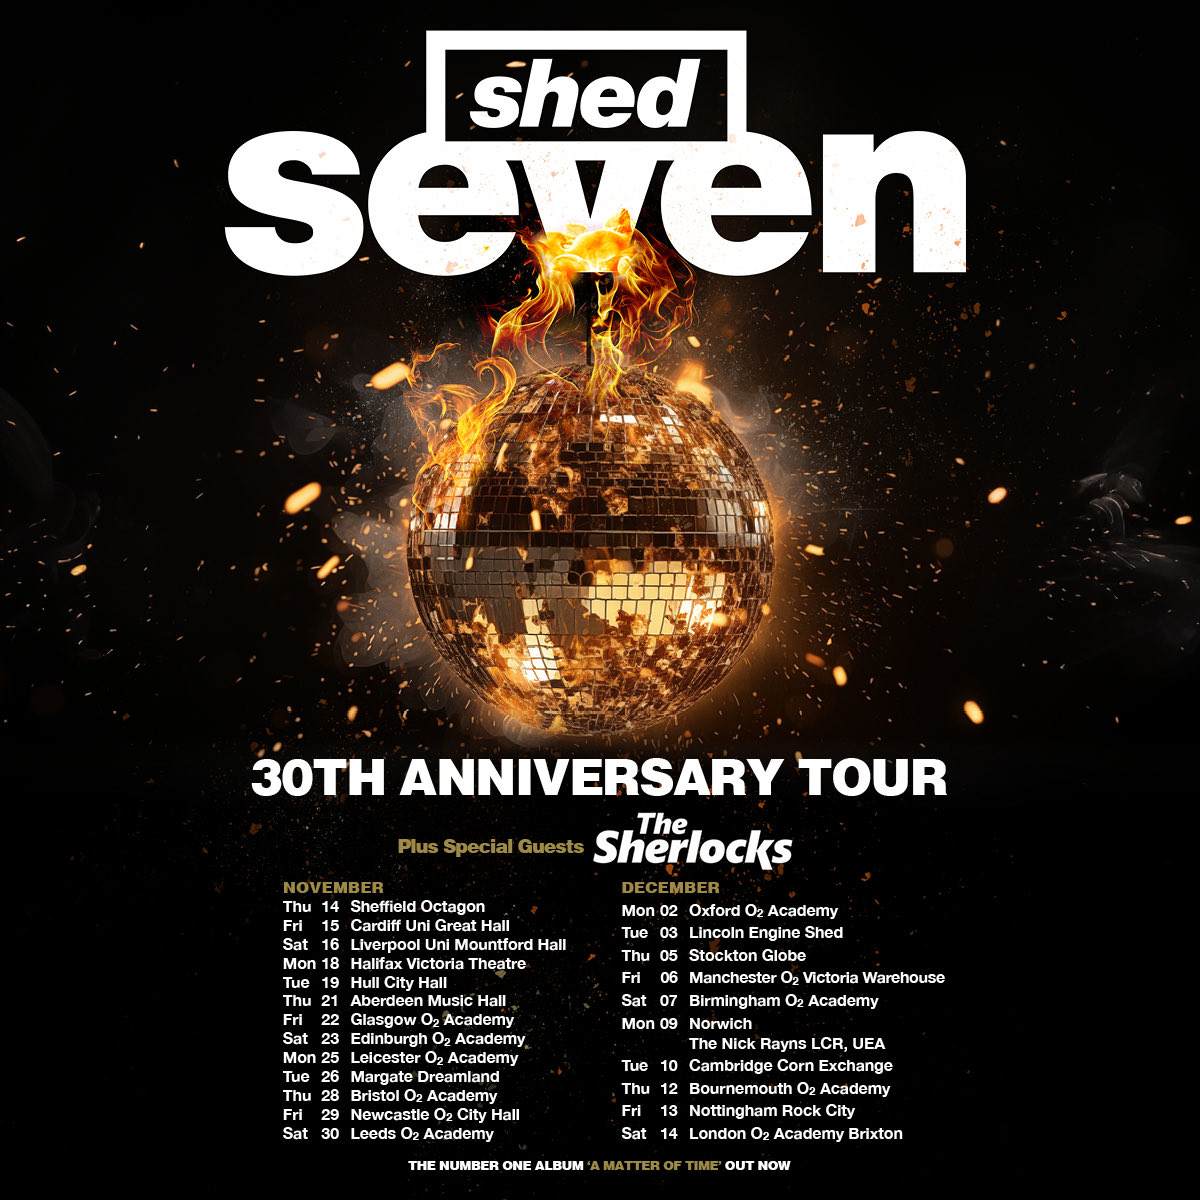 ICYMI // Celebrating three decades of indie rock anthems, @shedseven will be heading out on a huge run of 30th anniversary shows in November/December! Better still? Special guests @TheSherlocks will be joining 'em for the ride too. Grab tickets here👉 tinyurl.com/5n7wen46